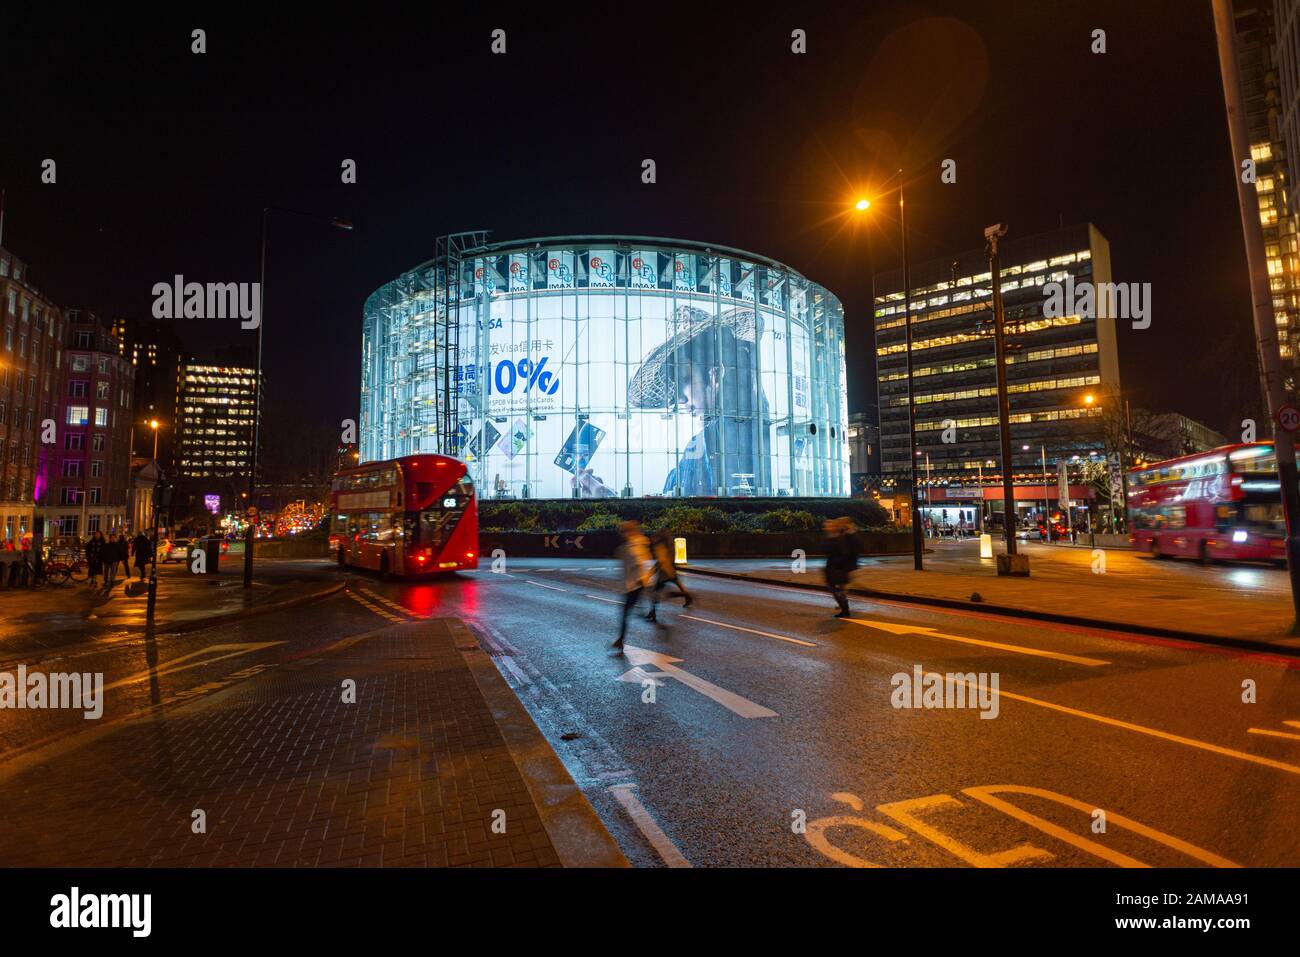 Odeon BFI Imax cinema at night with a red bus and pedestrians, Waterloo, London Stock Photo